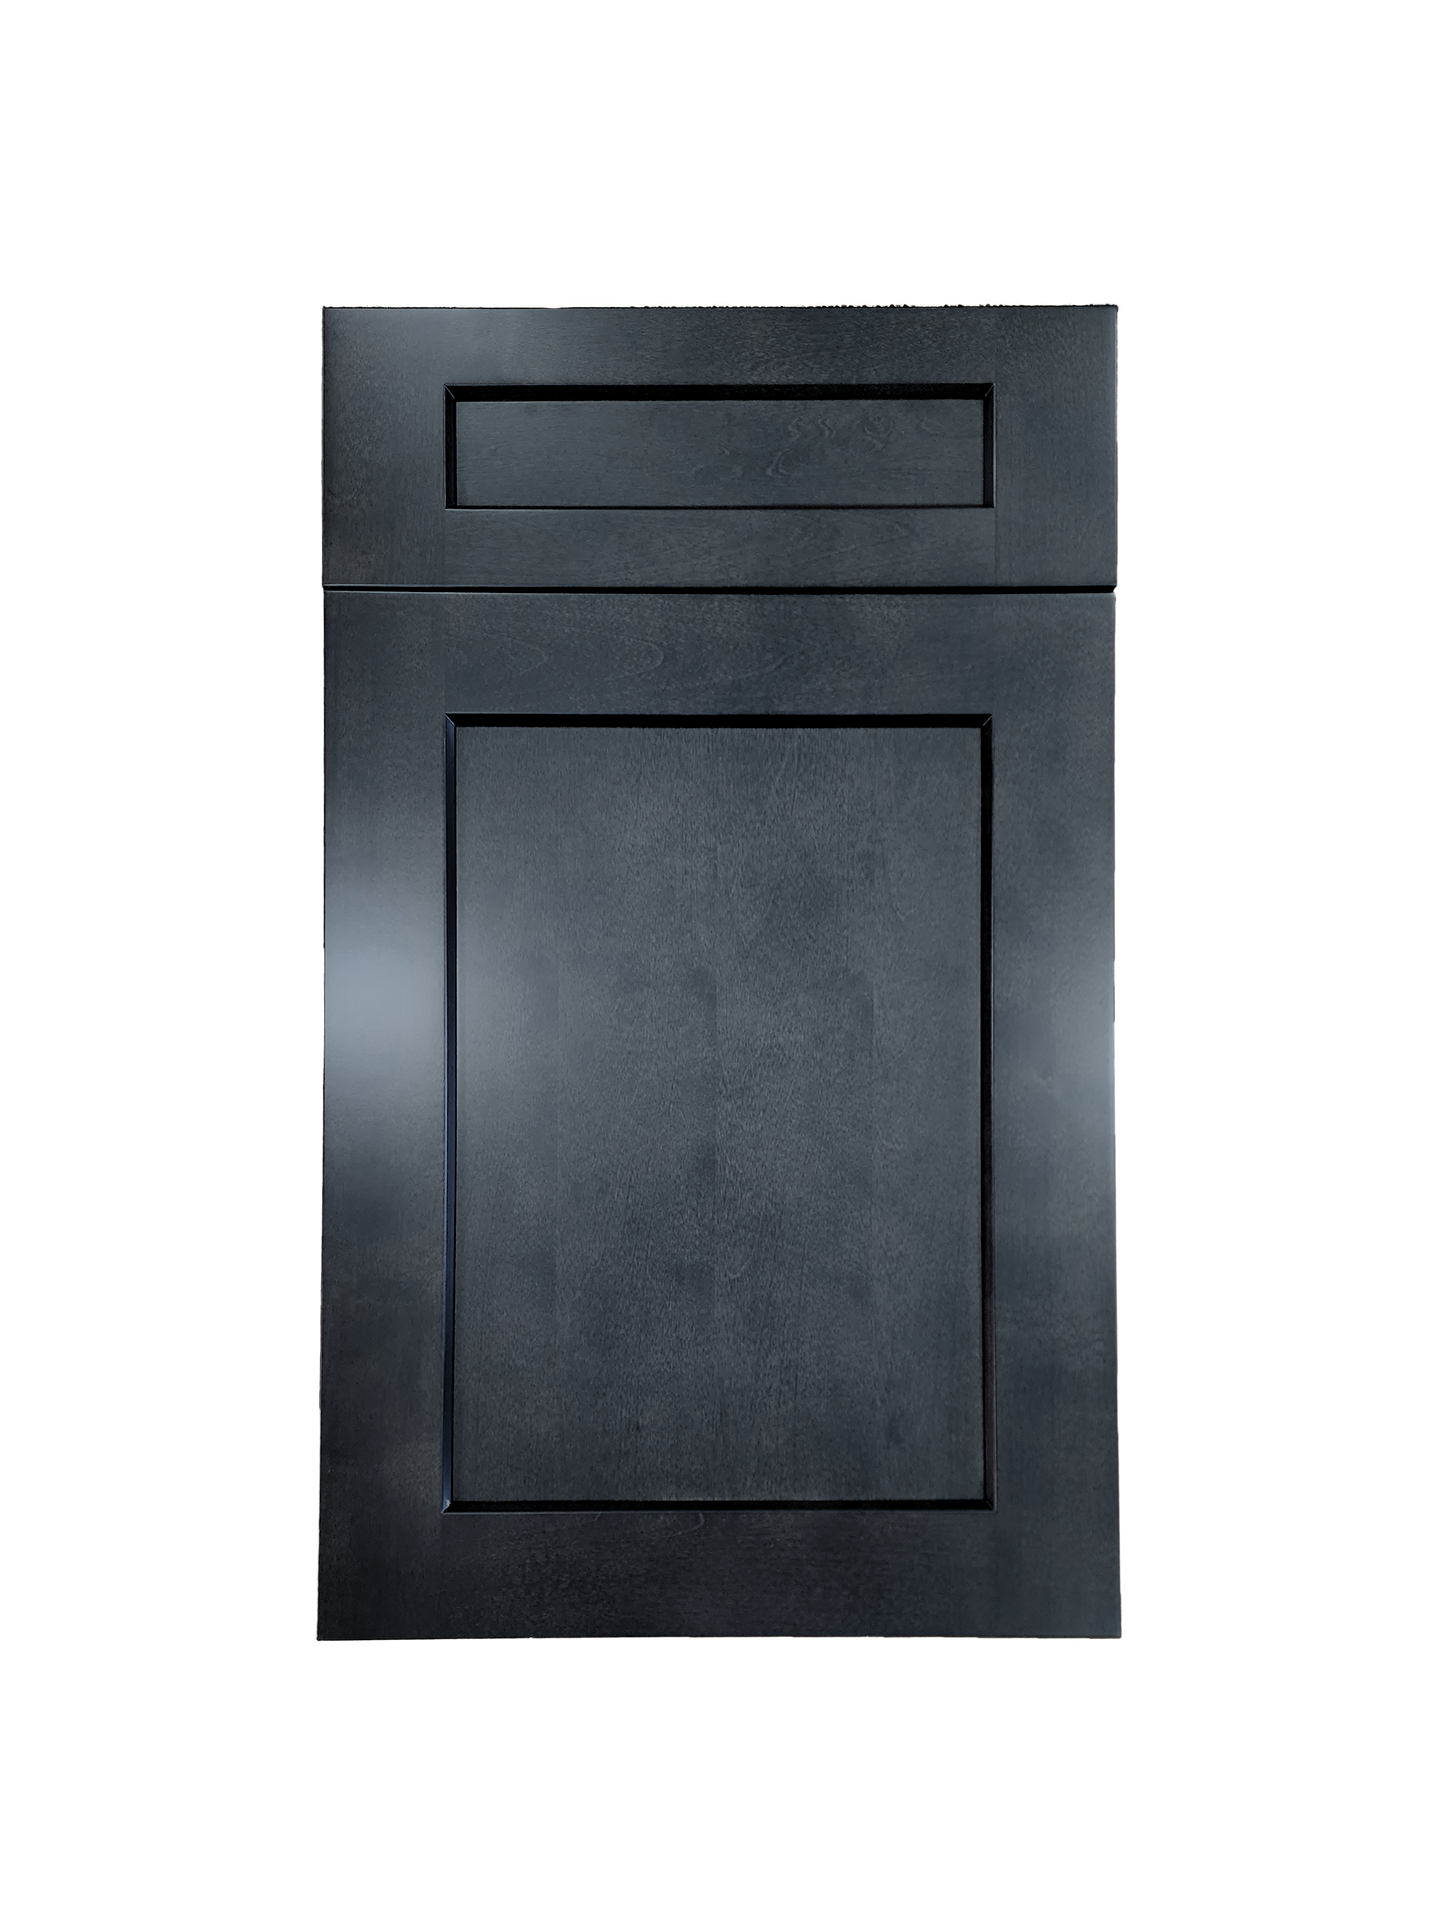 Stormy Grey Wall Cabinet 12 inches wide 12 inches deep 42 inches tall with Stormy Grey box and Stormy Grey doors